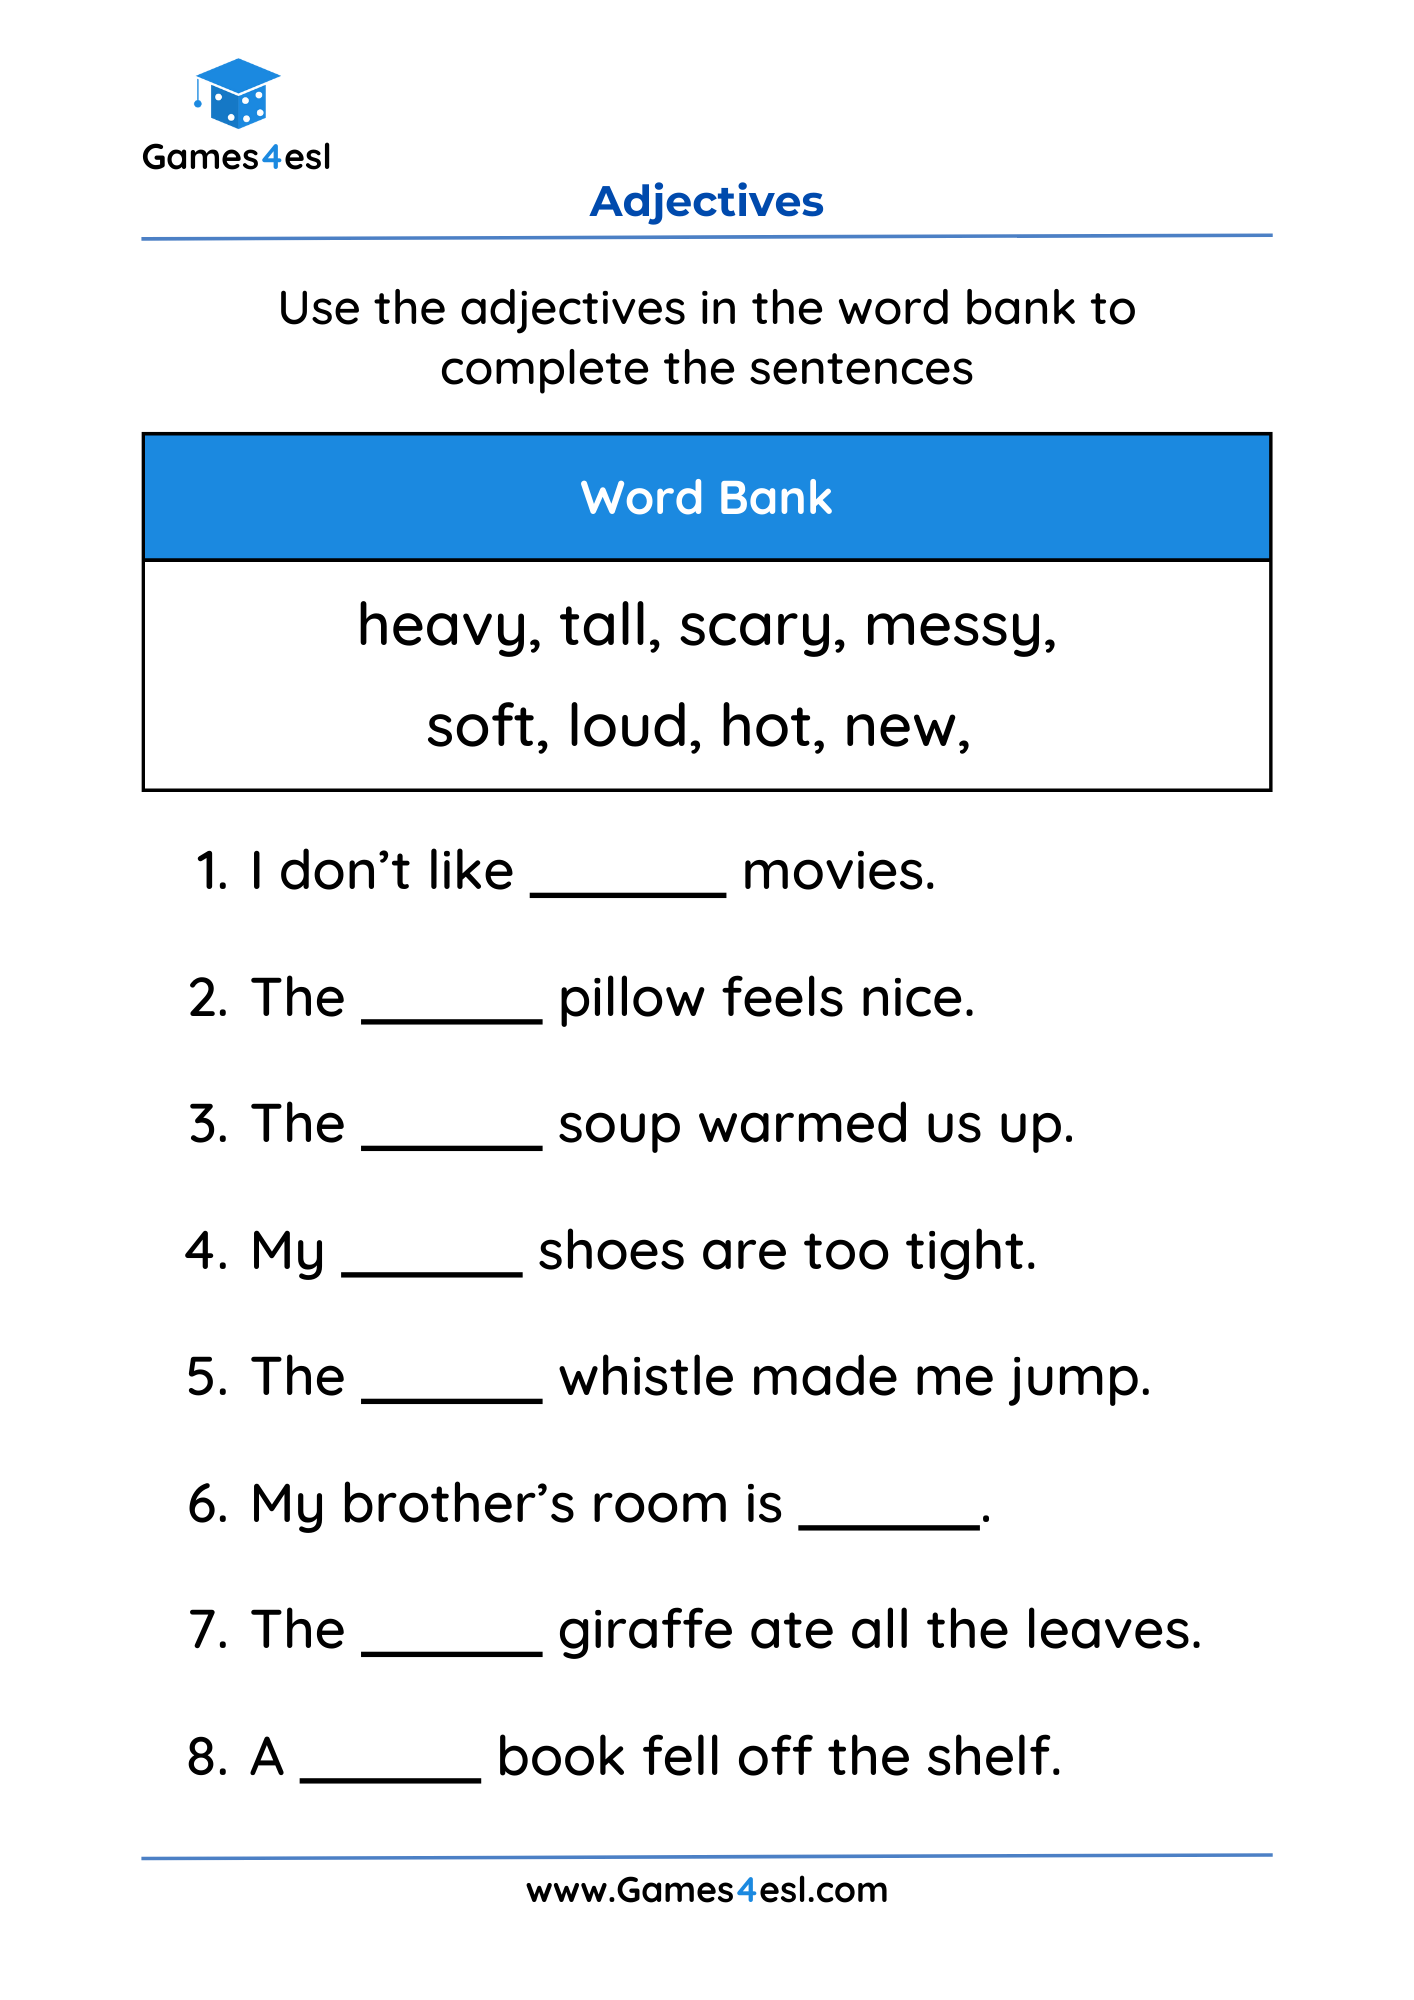 A worksheet to teach adjectives to grade 2.